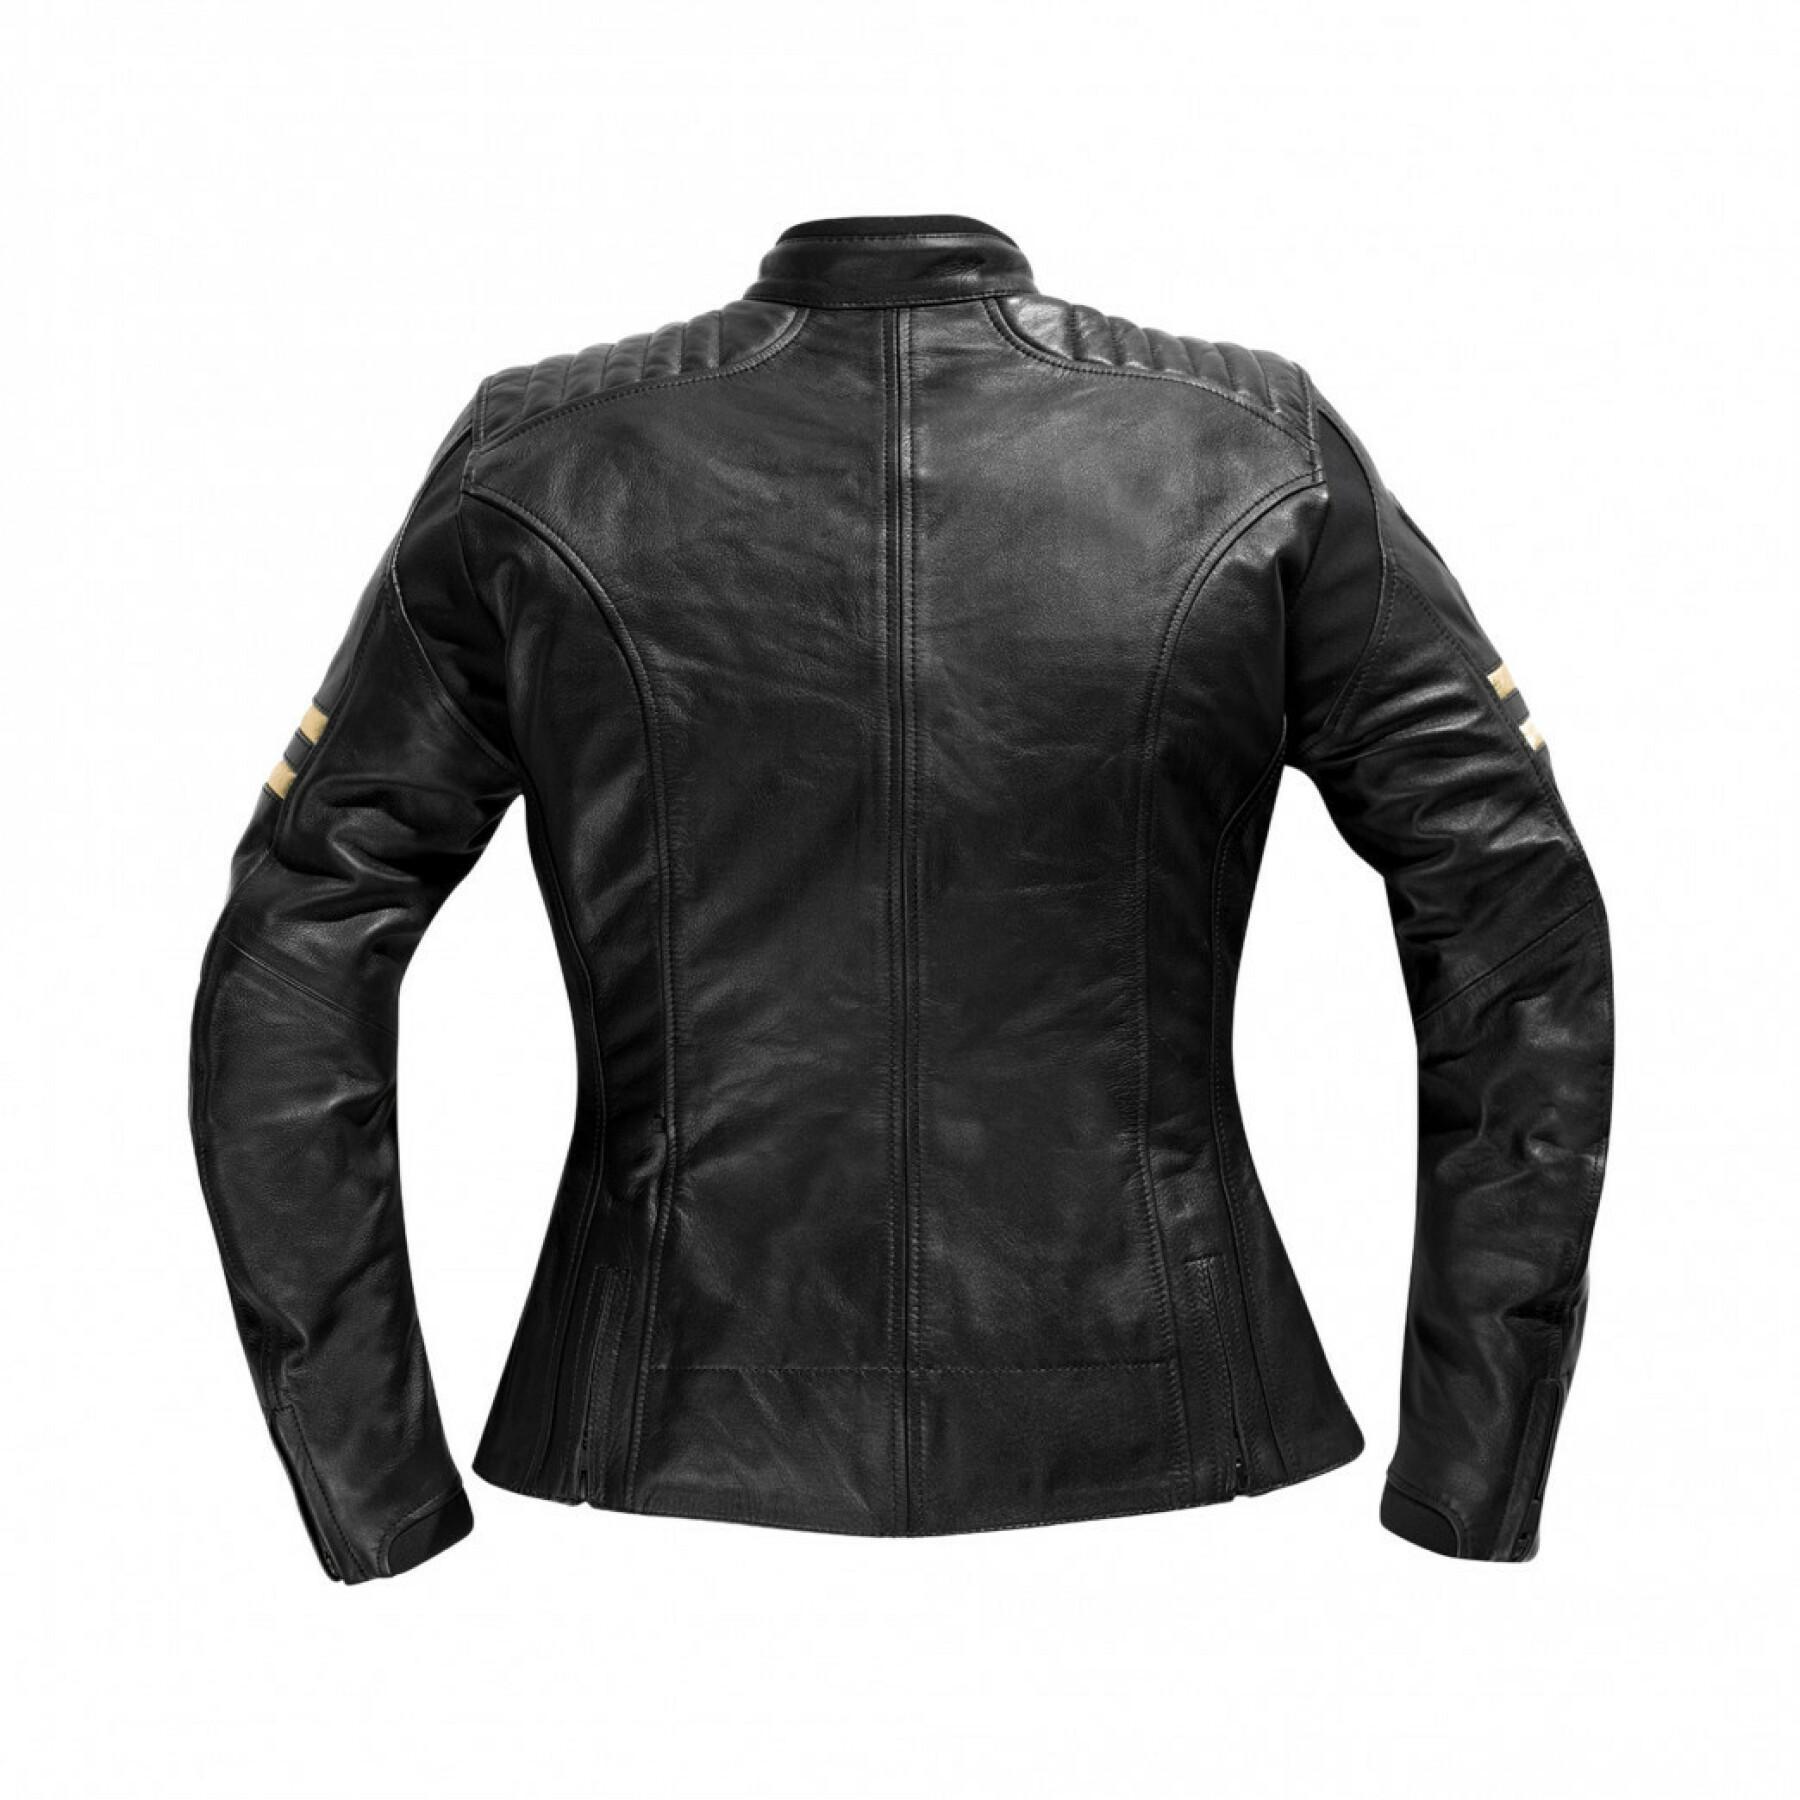 Leather motorcycle jacket for women Difi She Devil